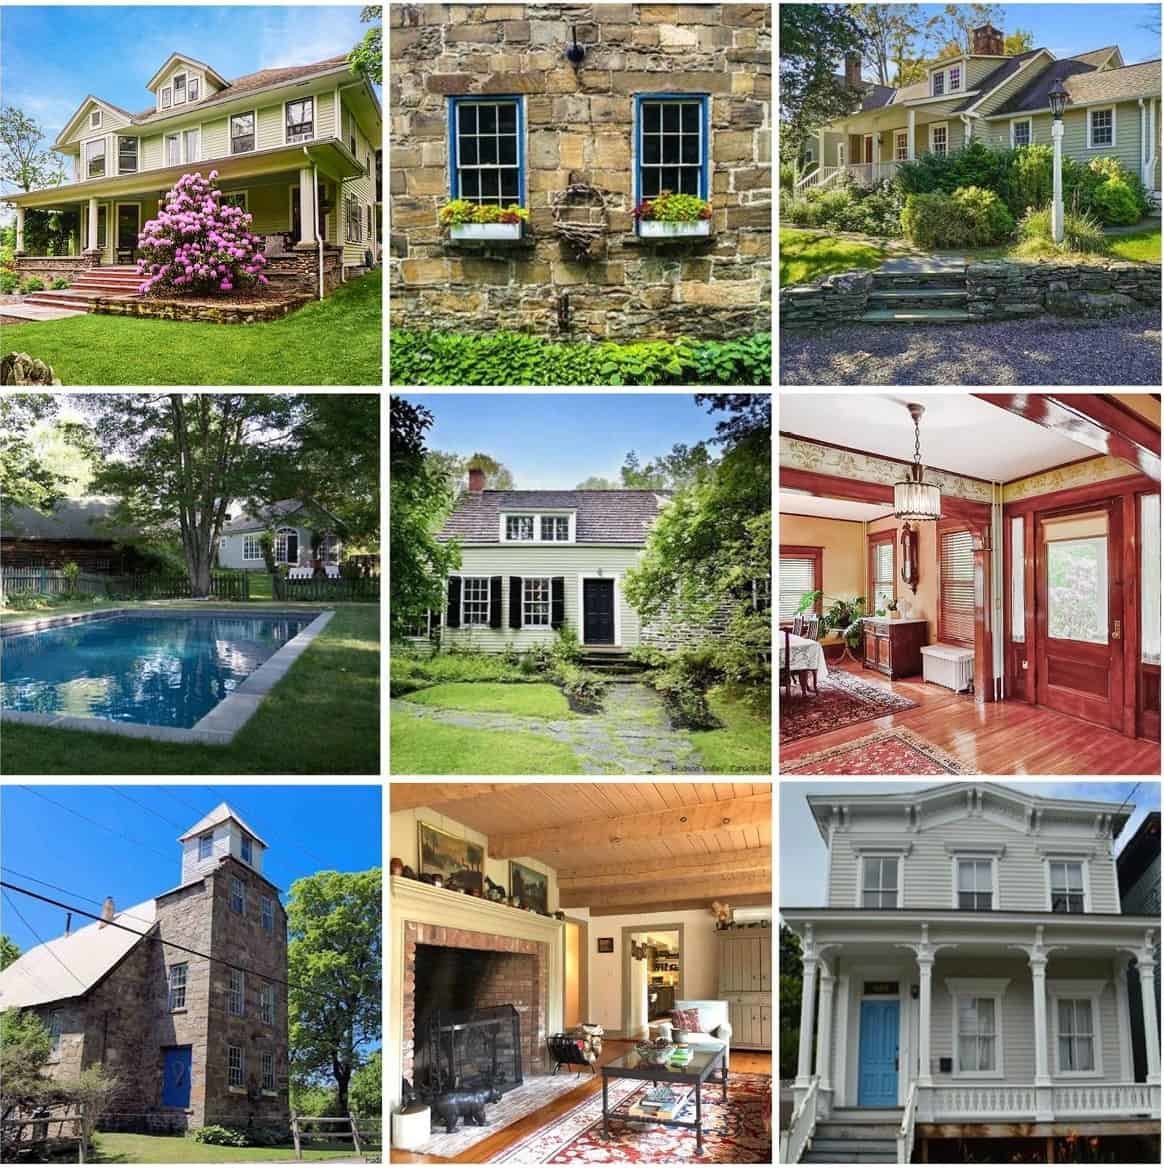 Historic Stone Homes For Sale in The Hudson Valley